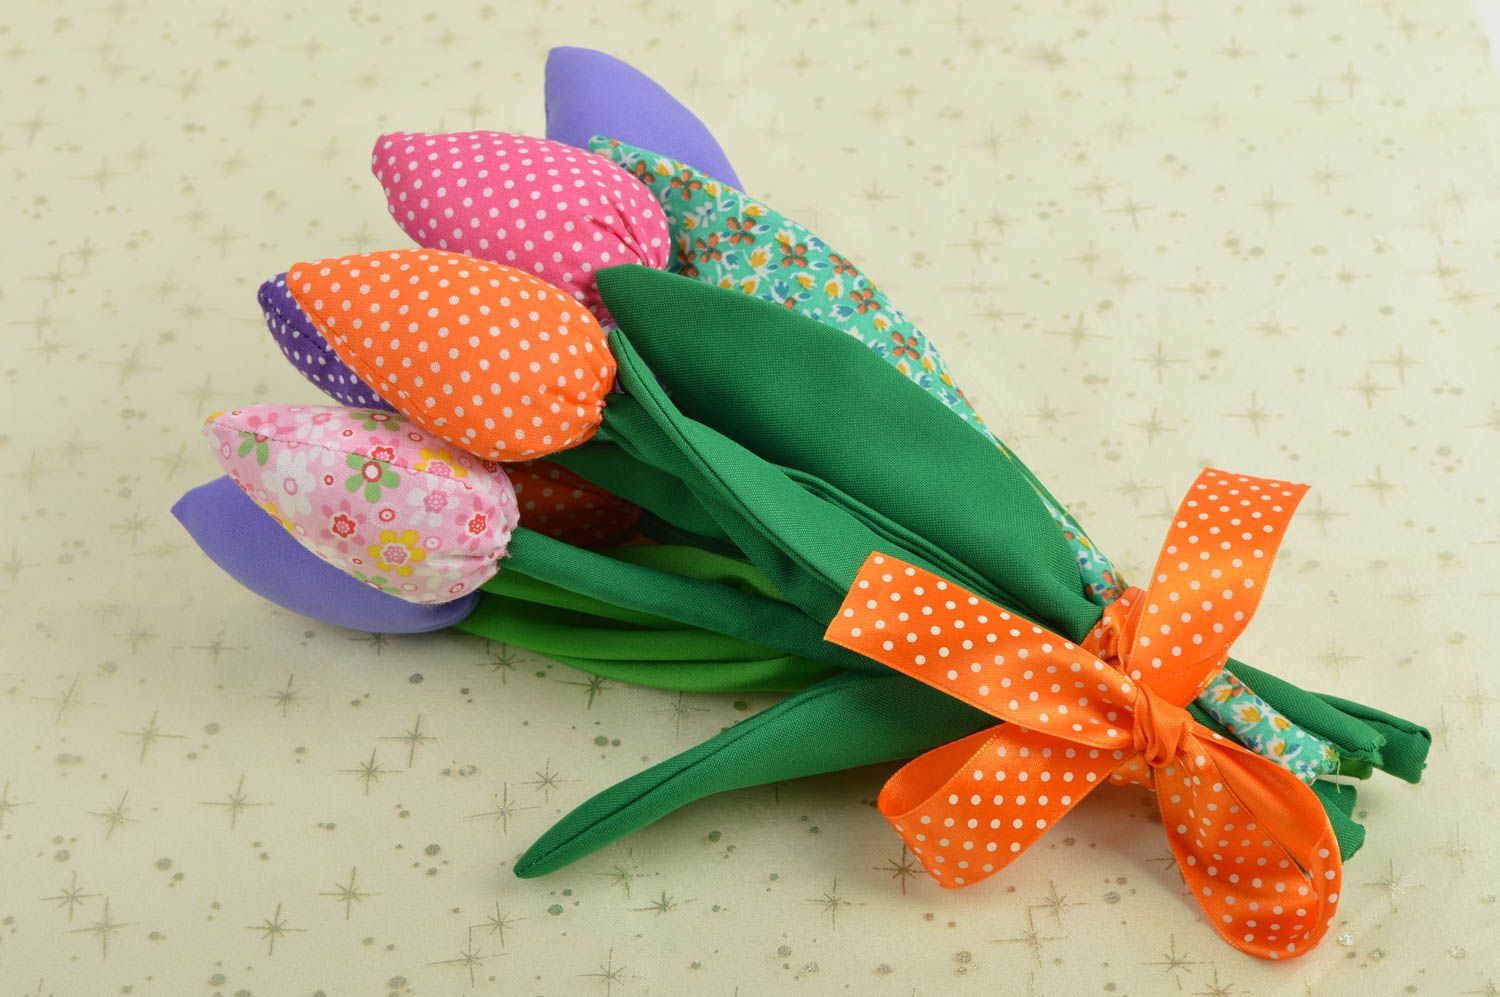 Artificial handmade flowers decorative use only cute 9 textile flowers photo 1